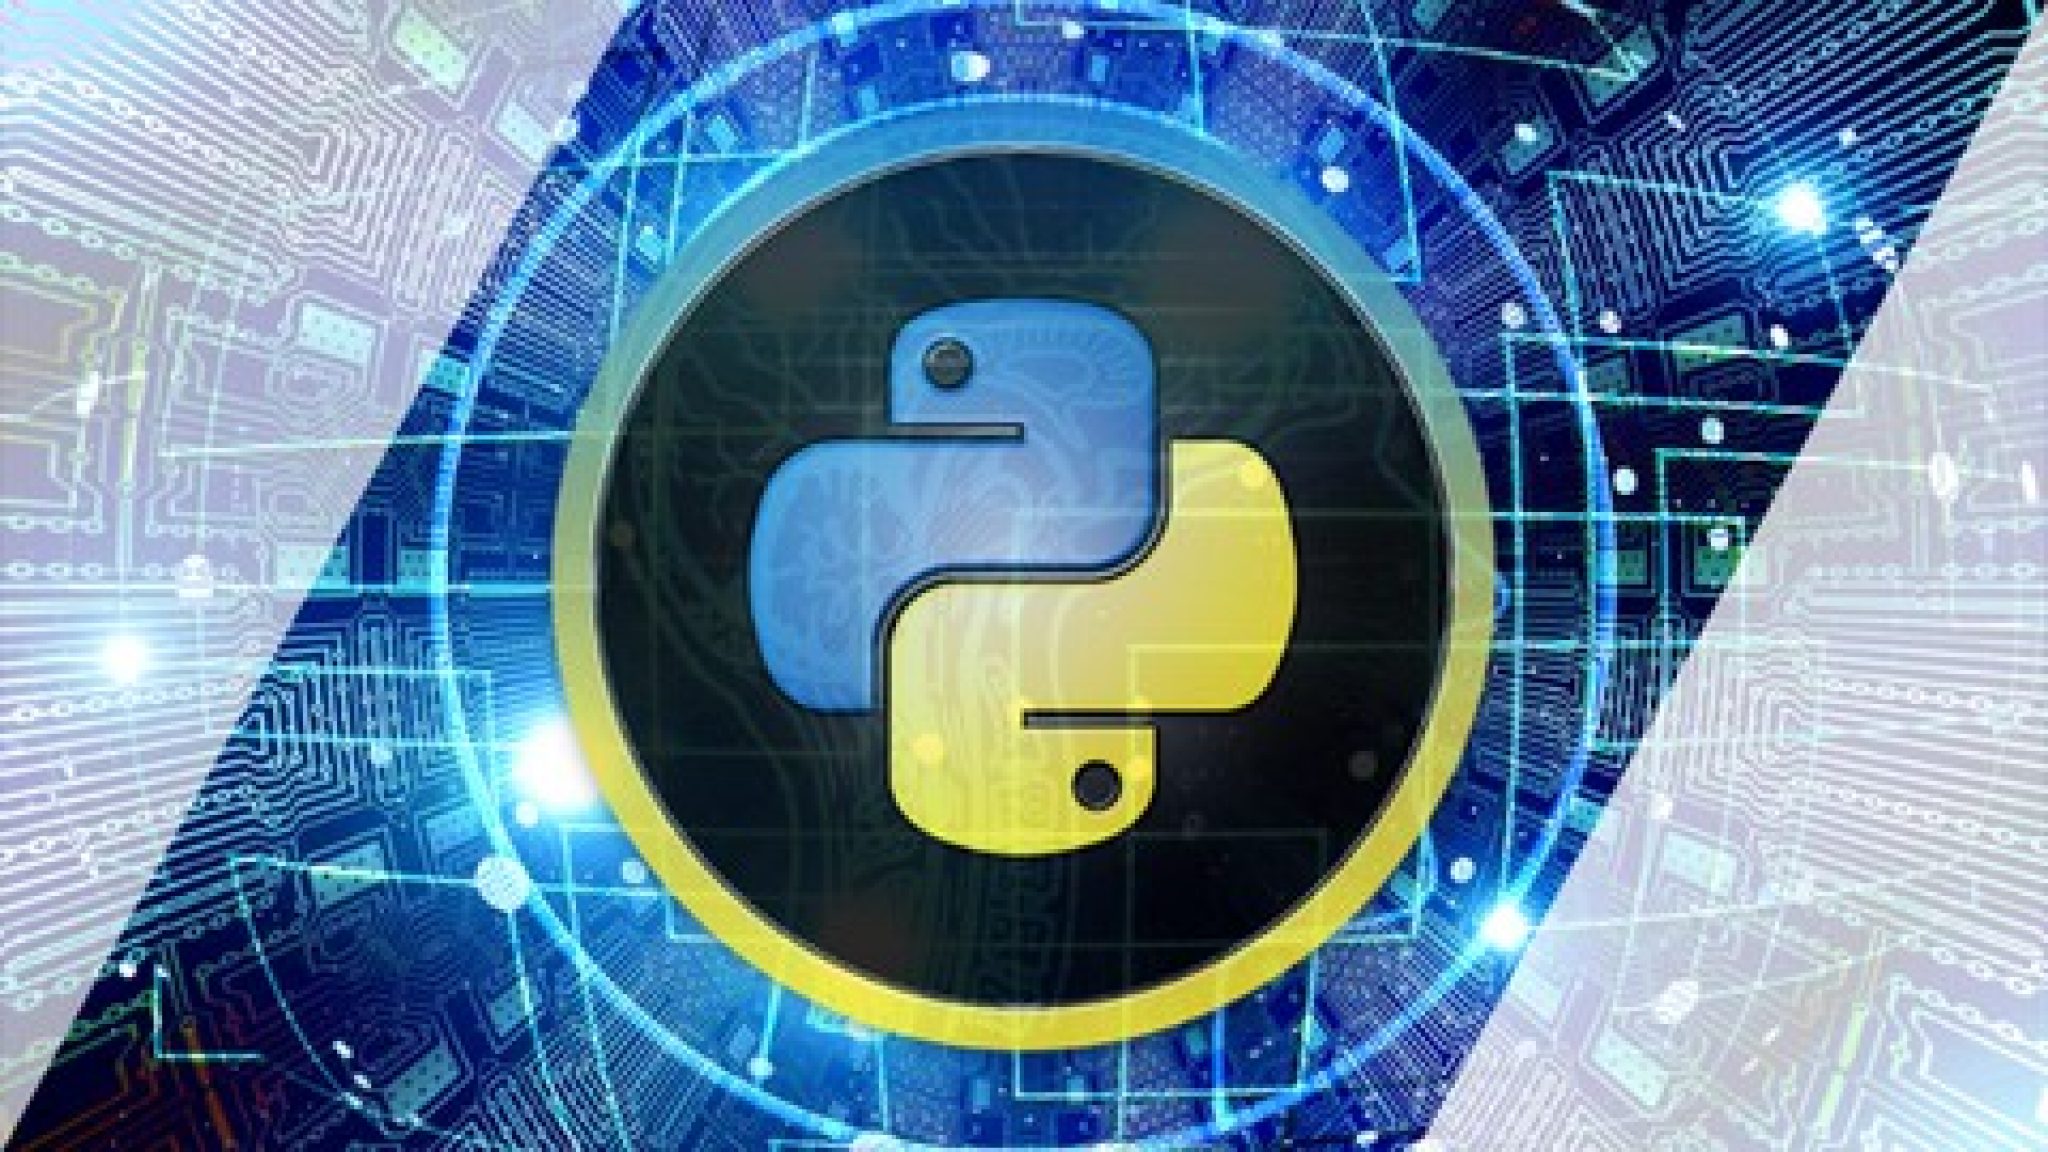 [Udemy Coupon] The Complete Python Hacking Course: Beginner to Advanced!